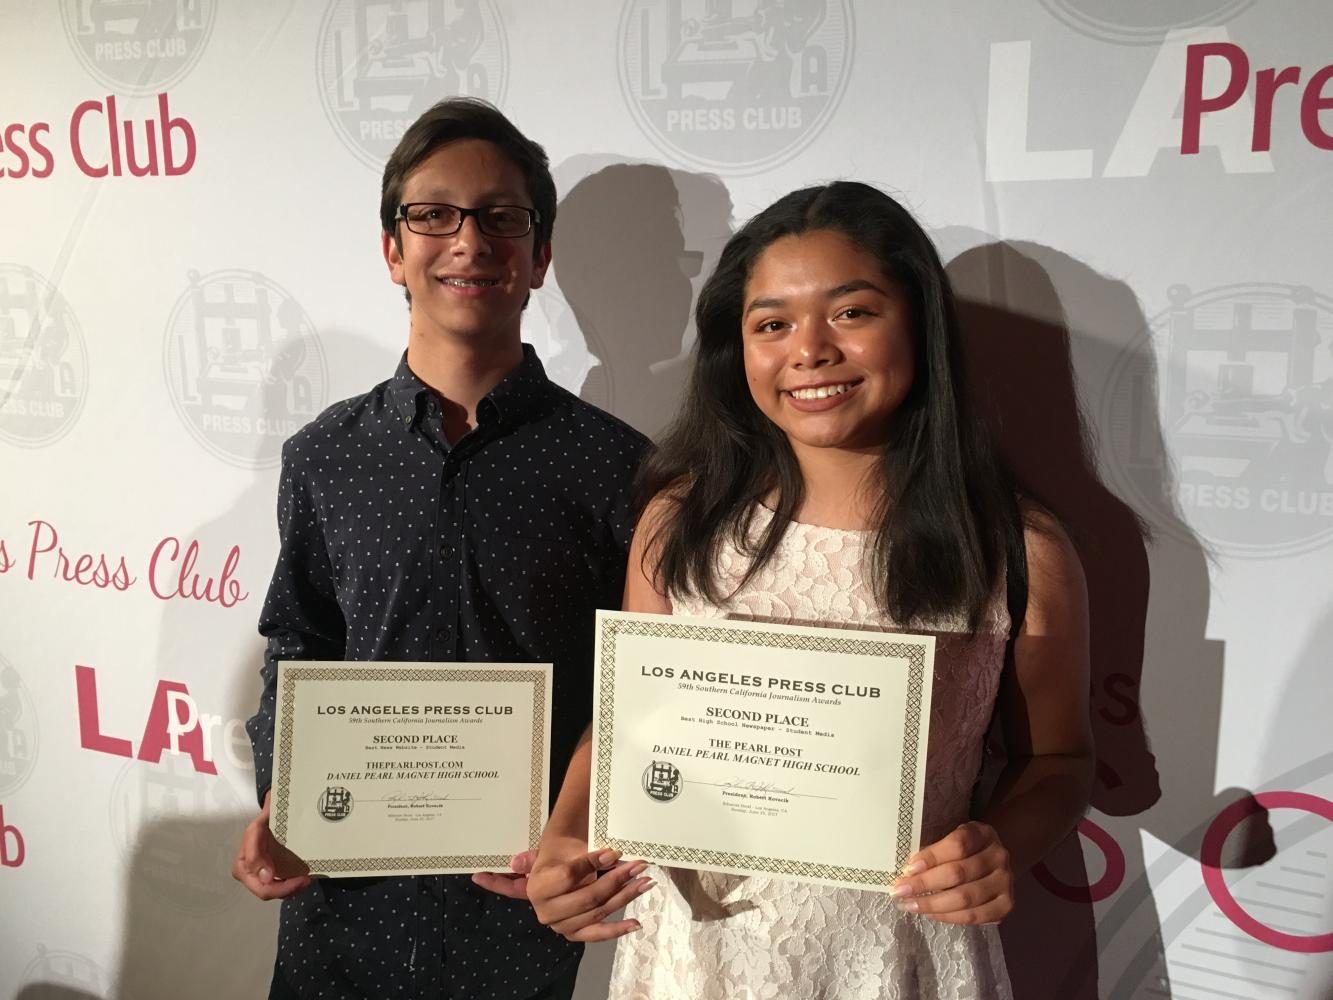 Editors Michael Chidbachian and Kirsten Cintigo after receiving second place for both the online and print publications at the 2017 SoCal L.A. Press Club Awards in June 2017.